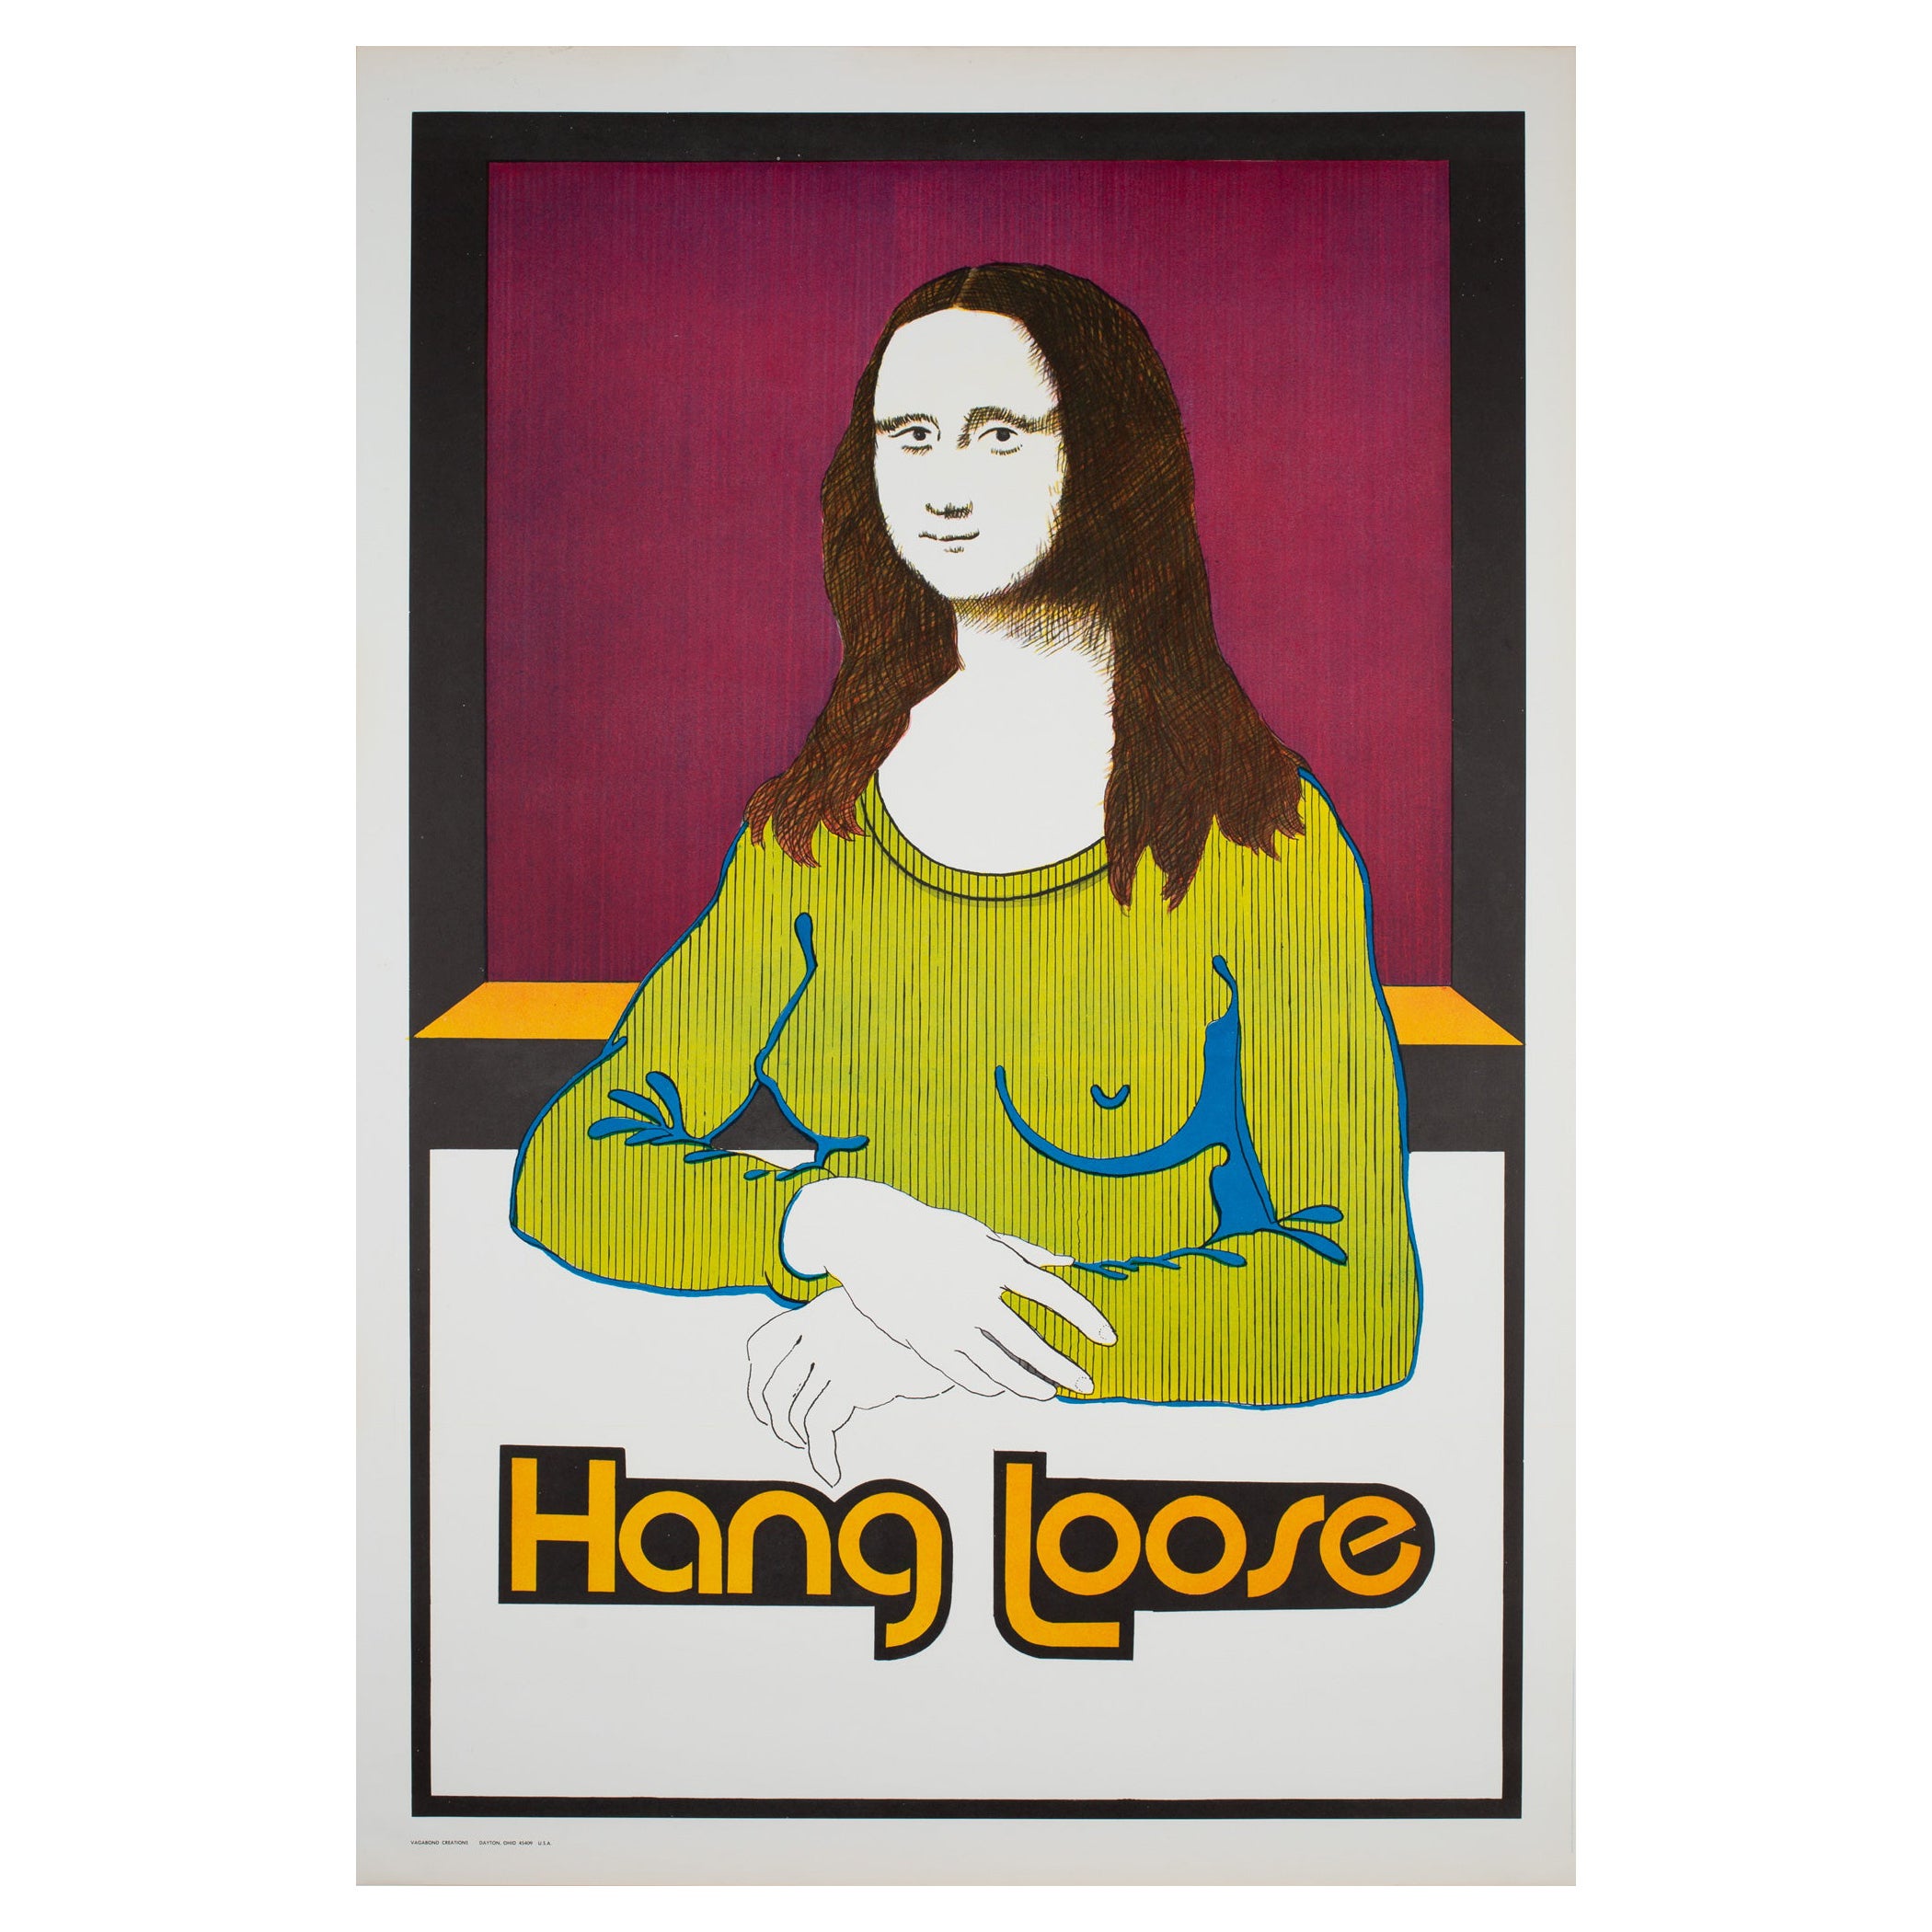 Hang Loose 1970s American Political/Protest Poster, Women's Lib Mona Lisa For Sale